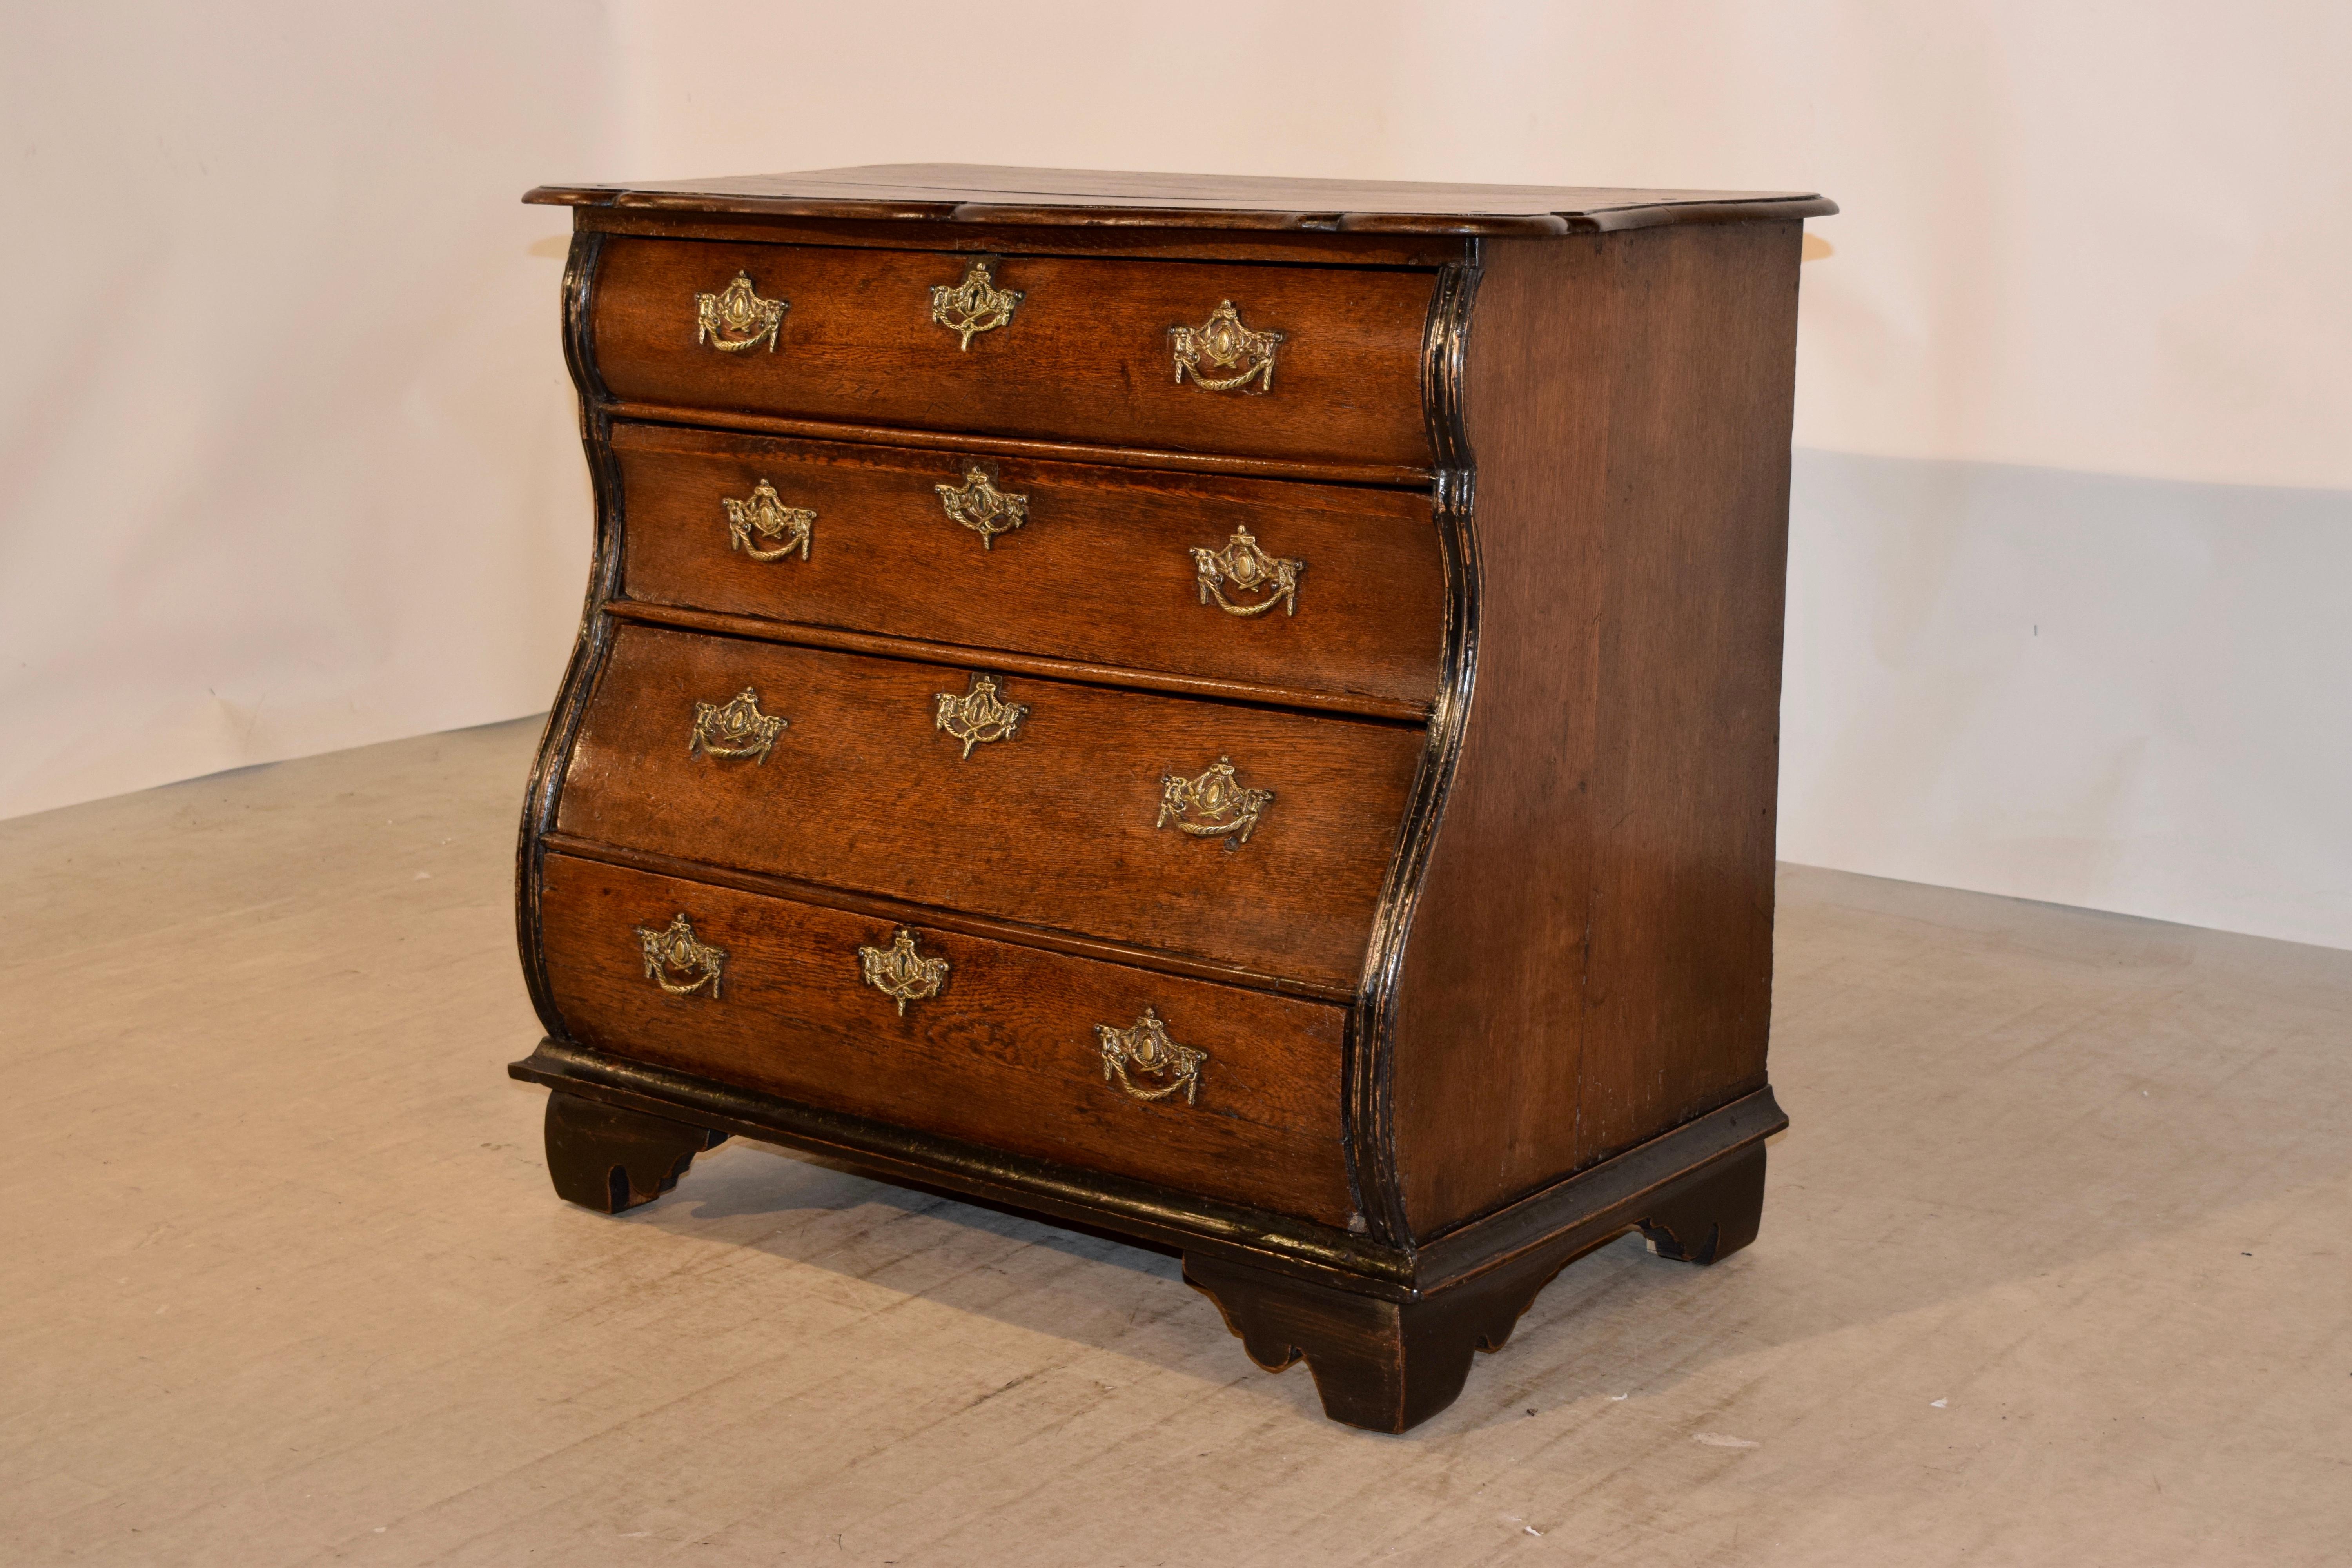 Dutch Colonial 18th Century Dutch Bombe Chest of Drawers